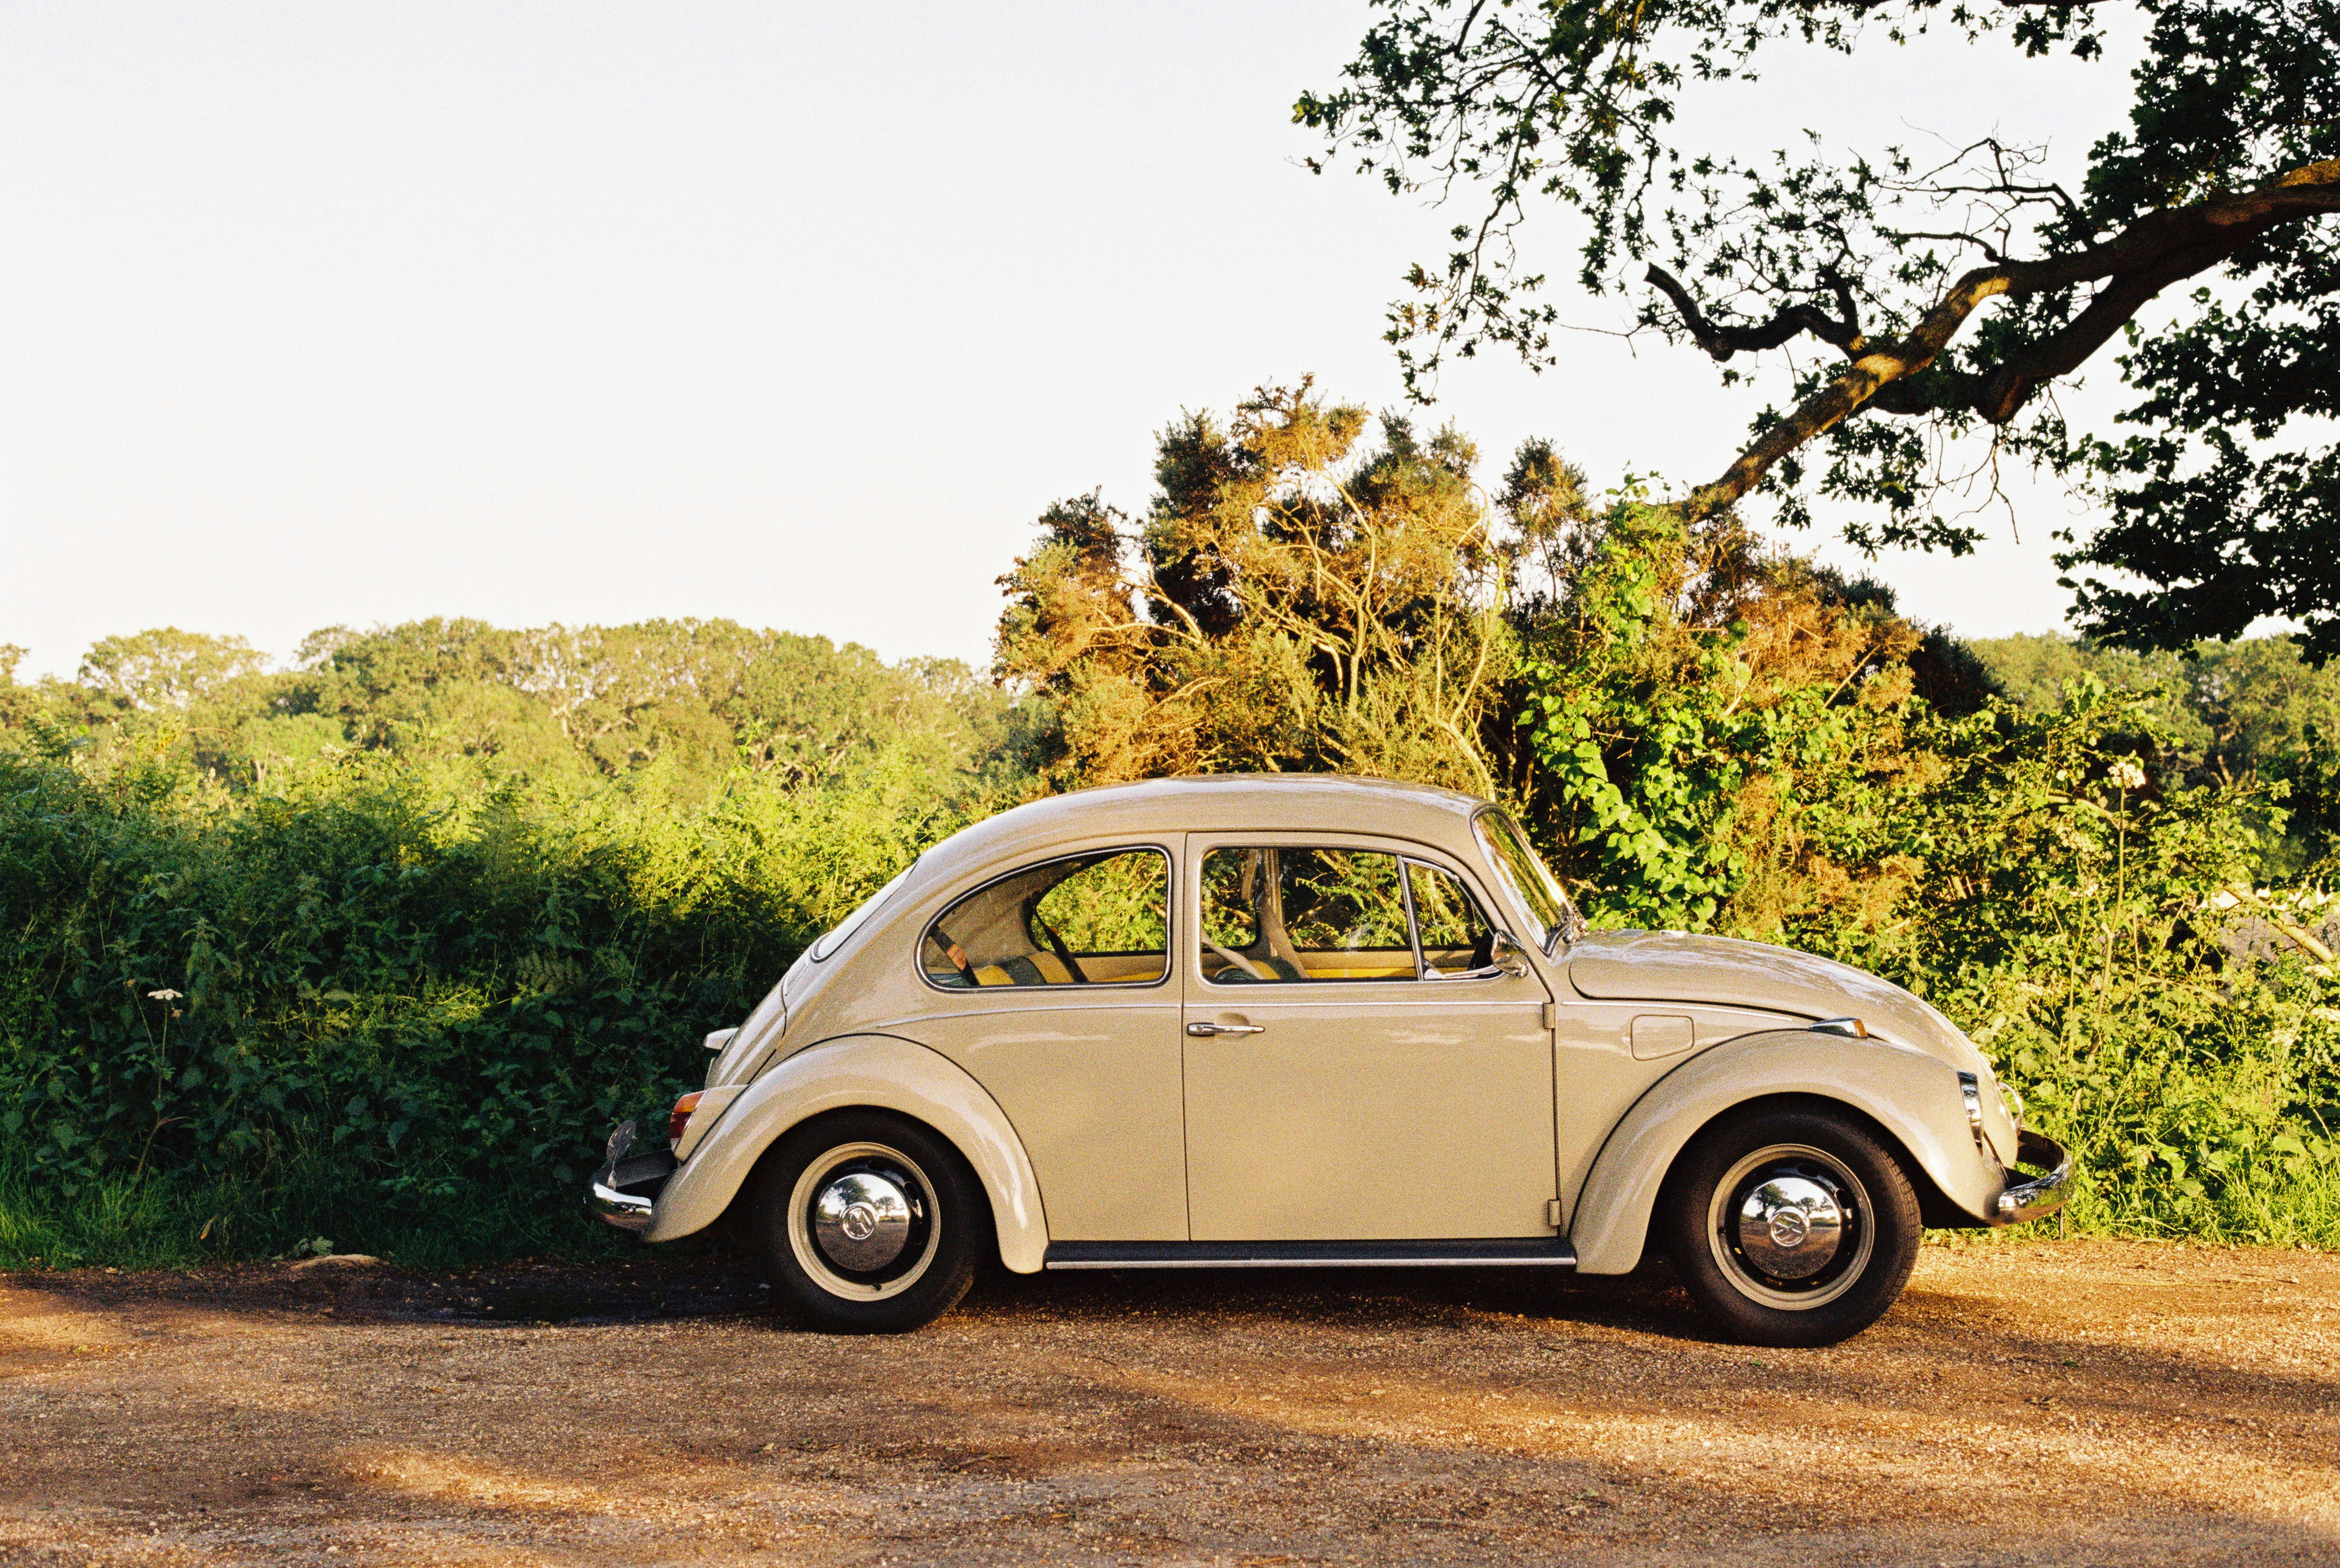 white volkswagen beetle parked on brown dirt road during daytime